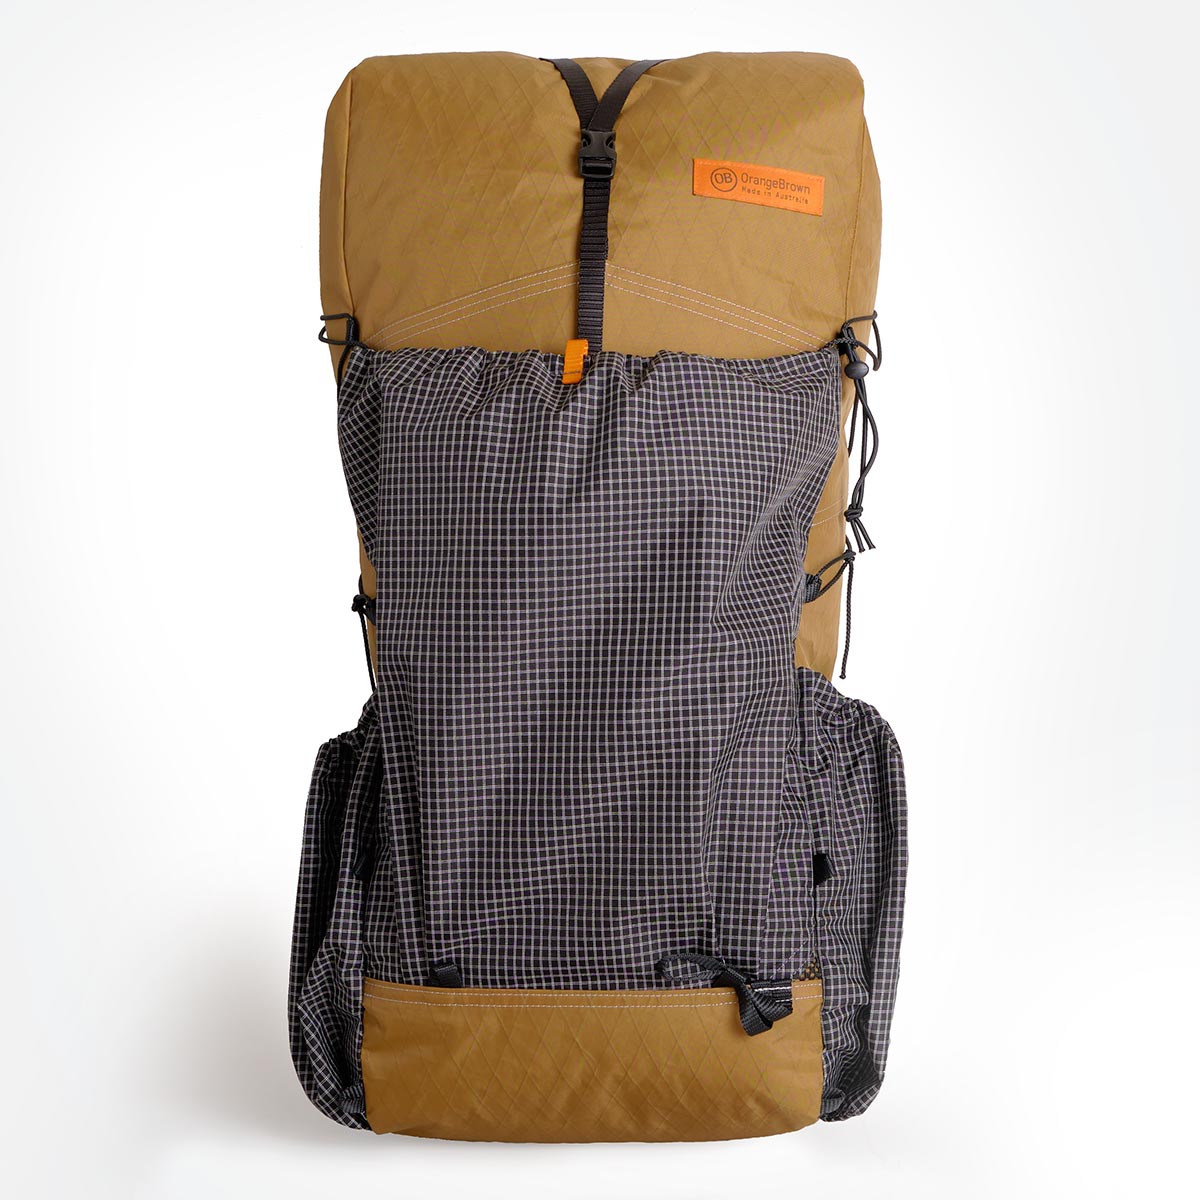 OrangeBrown backpack OB55 with large front and two side pockets. A Y-strap closes the roll-top. 